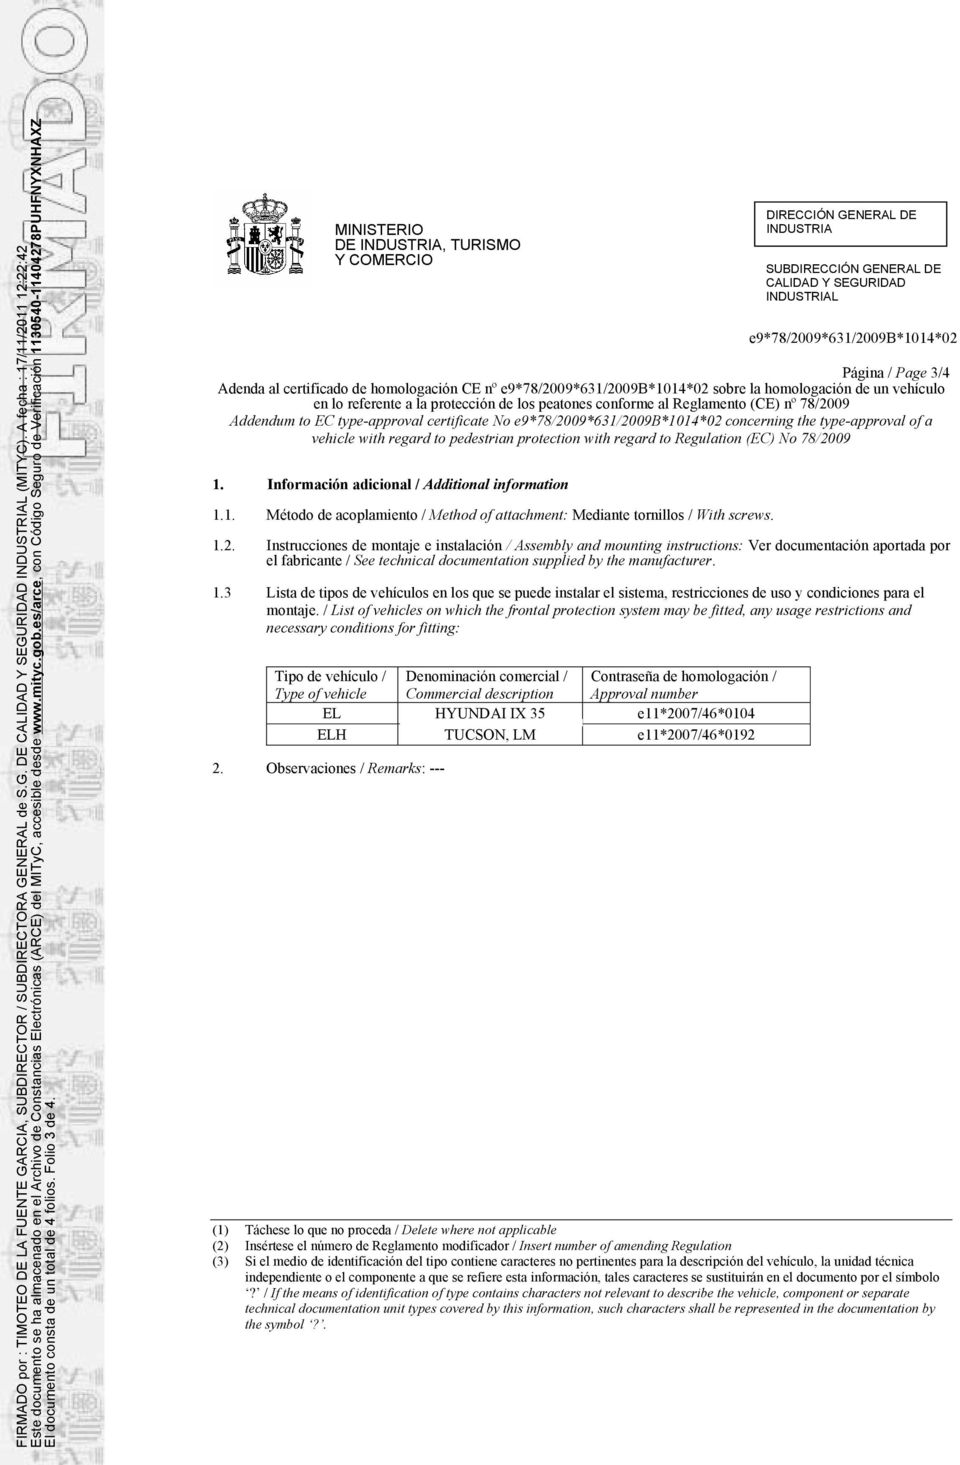 78/2009 Addendum to EC type-approval certificate No concerning the type-approval of a vehicle with regard to pedestrian protection with regard to Regulation (EC) No 78/2009 1.